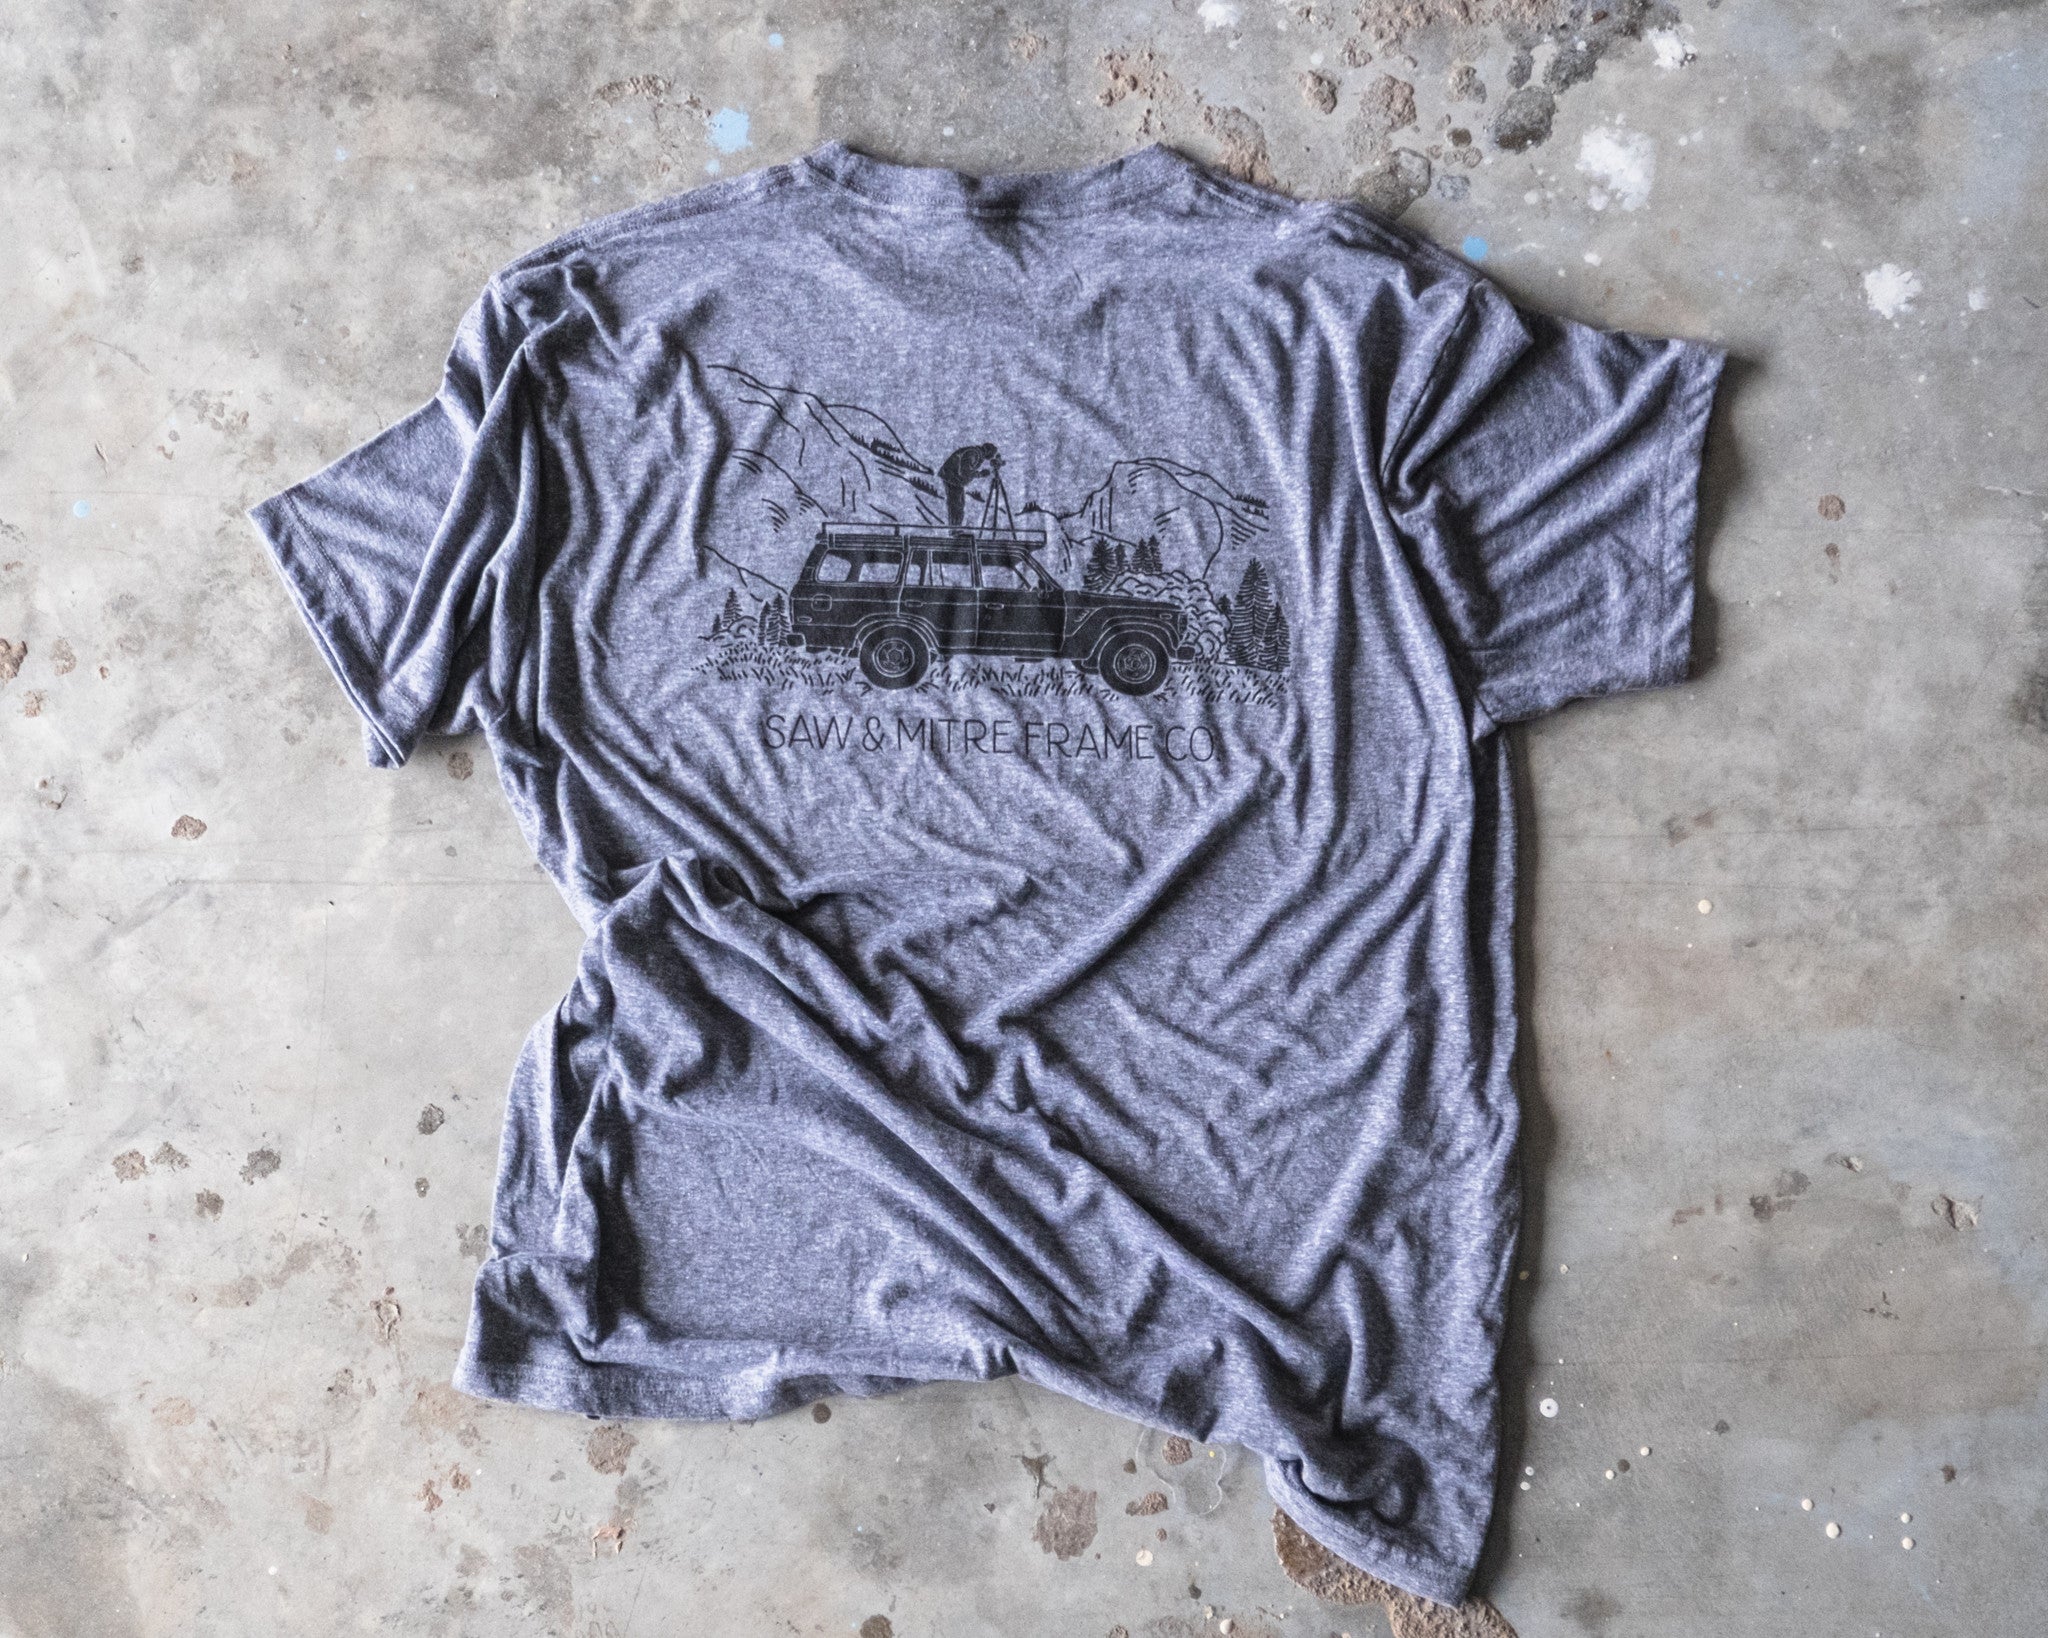 The Cruiser Tee by Saw & Mitre Frame Co.